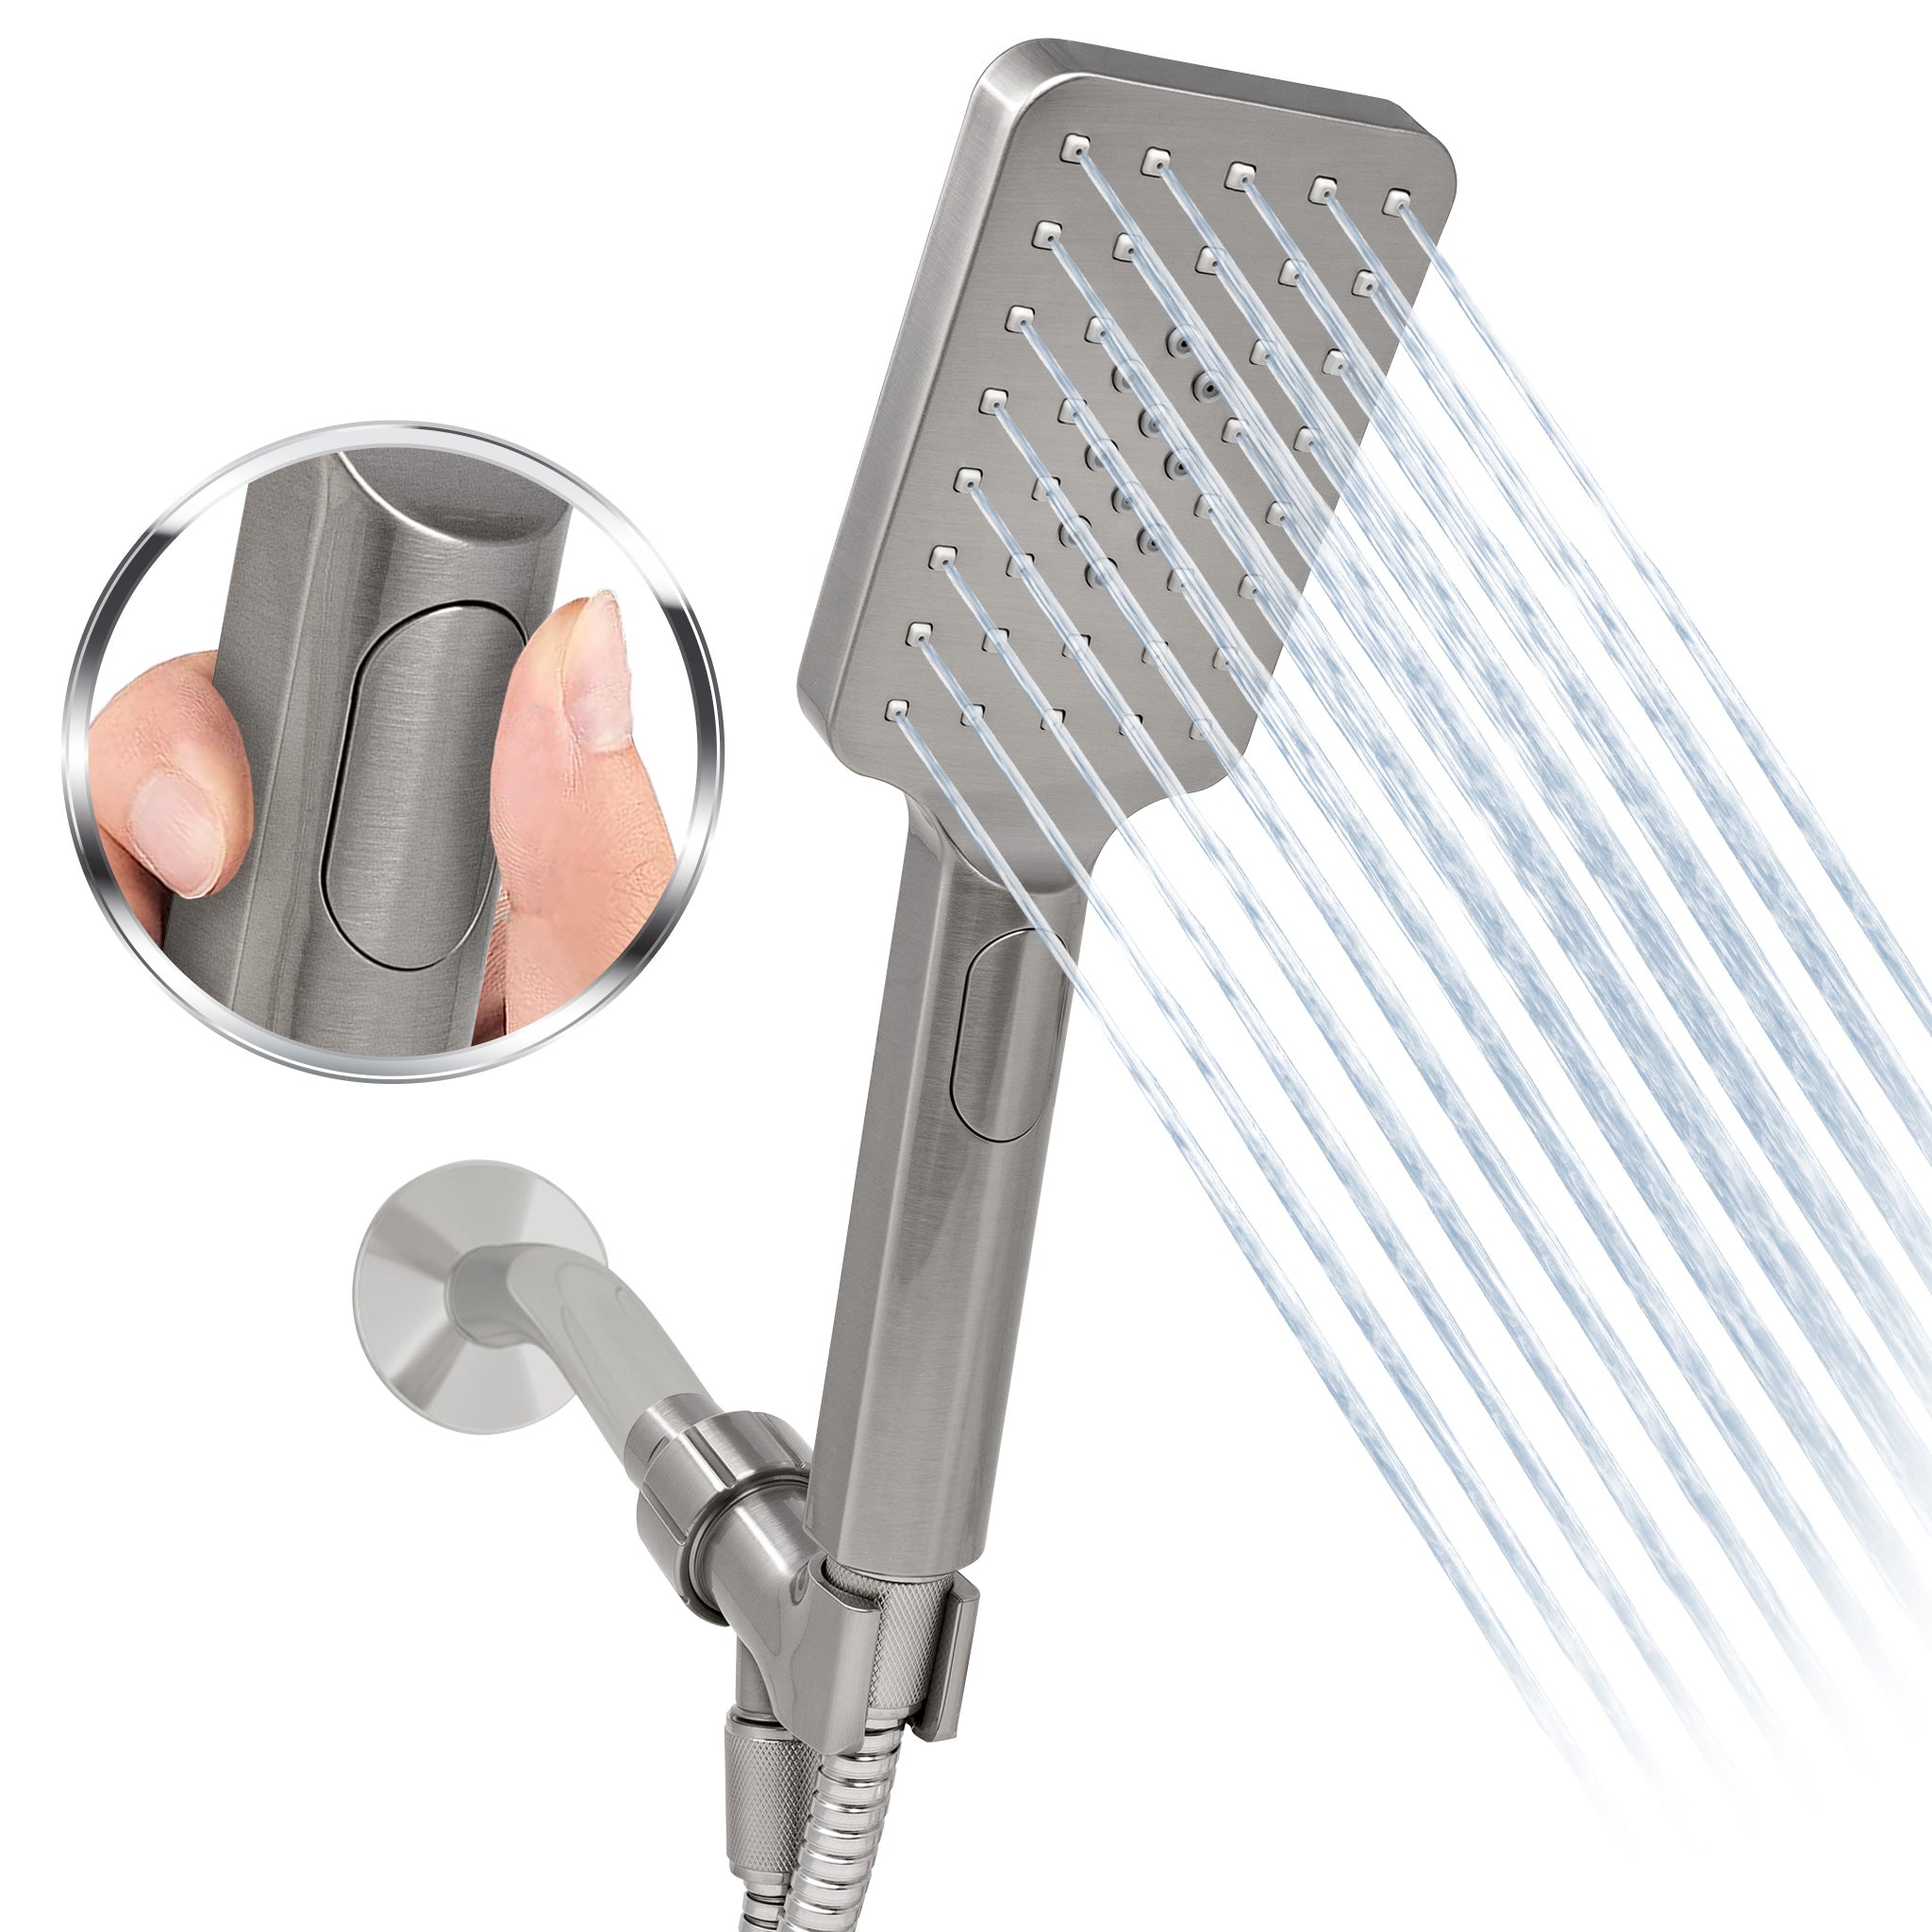 Metpure High-Pressure Handheld Shower Head with Easy Clicker for Multiple Sprays. Low Profile Lightweight Rectangular Shower Head. Stainless Steel Hose & Adjustable Mount Holder. Brushed Nickel Finish